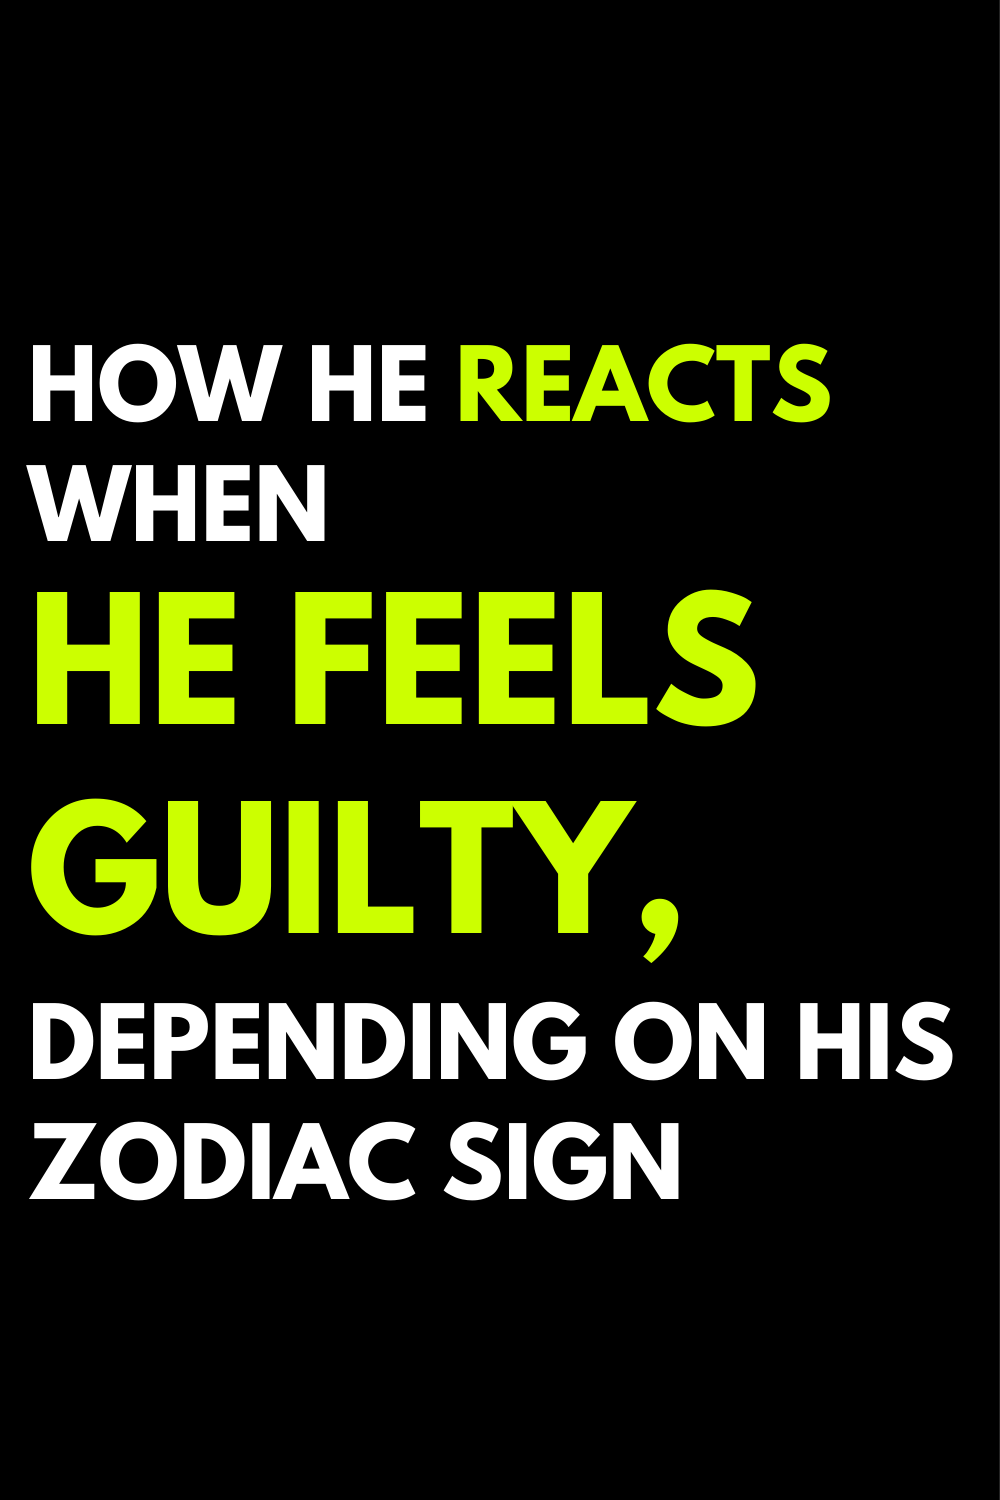 How he reacts when he feels guilty, depending on his zodiac sign